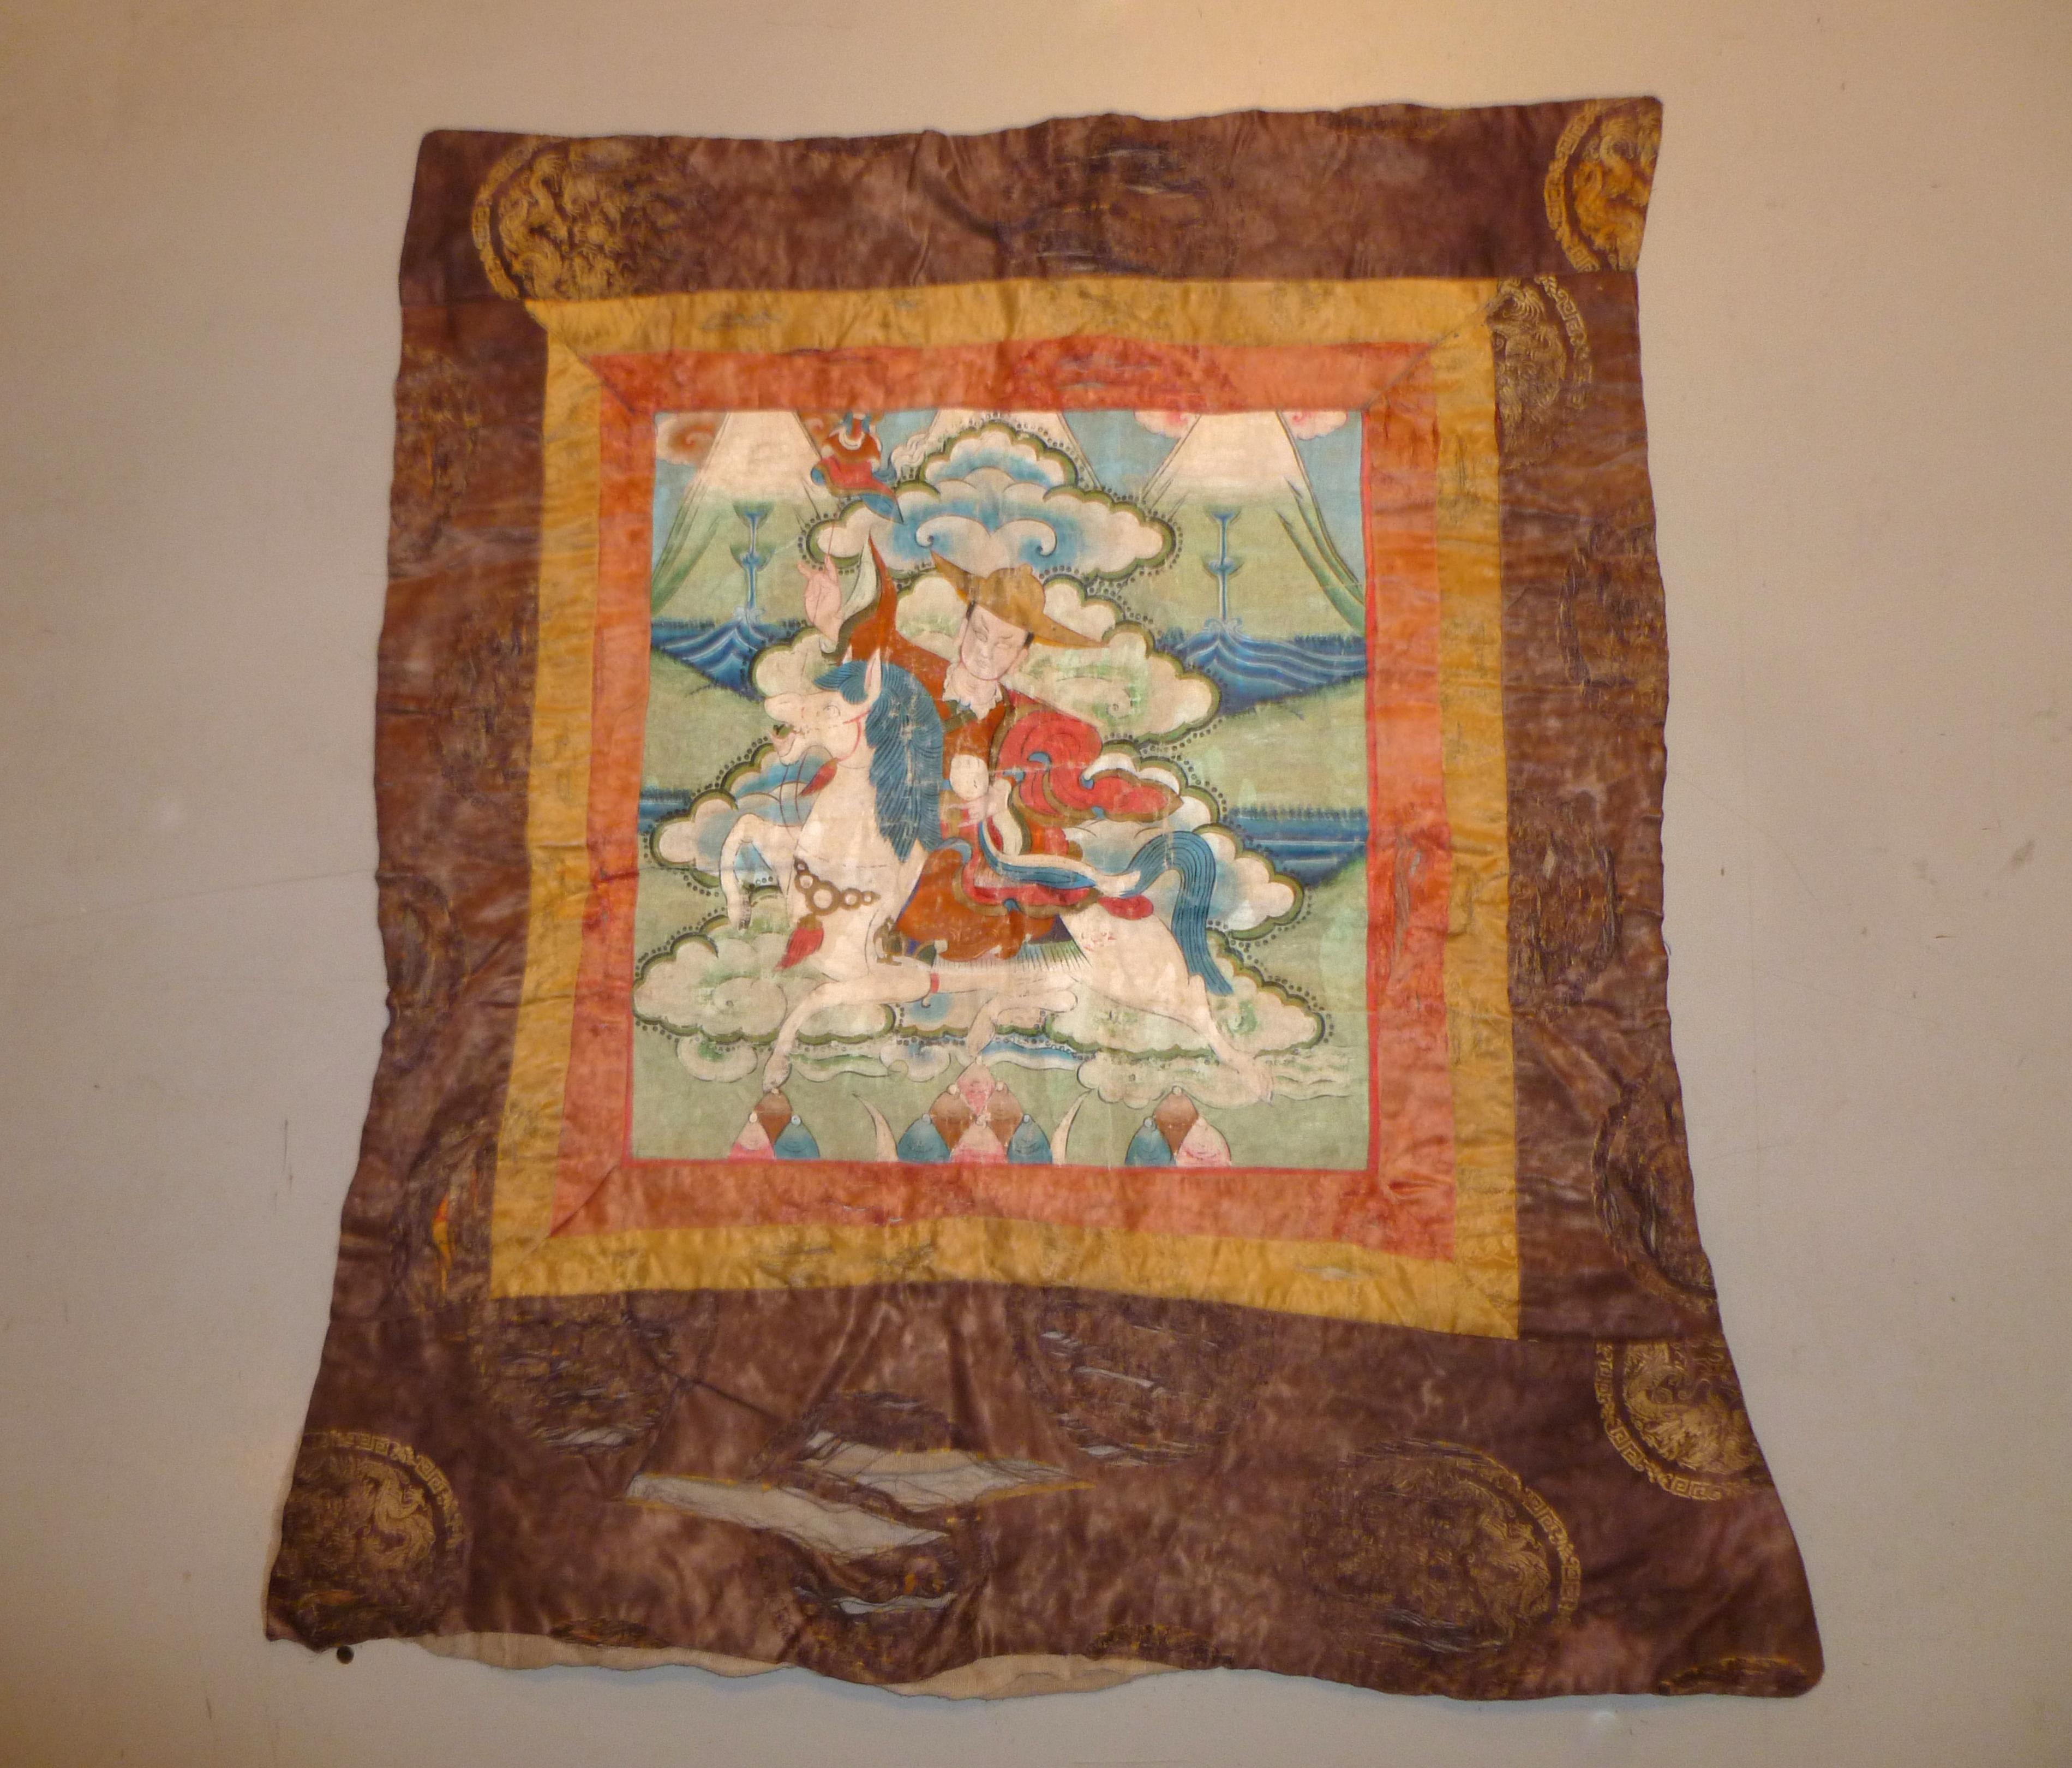 Antique Tibetan Thangka painted with horse rider in Mountain View
 Outside brown fabric with dragons style pattern
Overall size: 27' height.  23